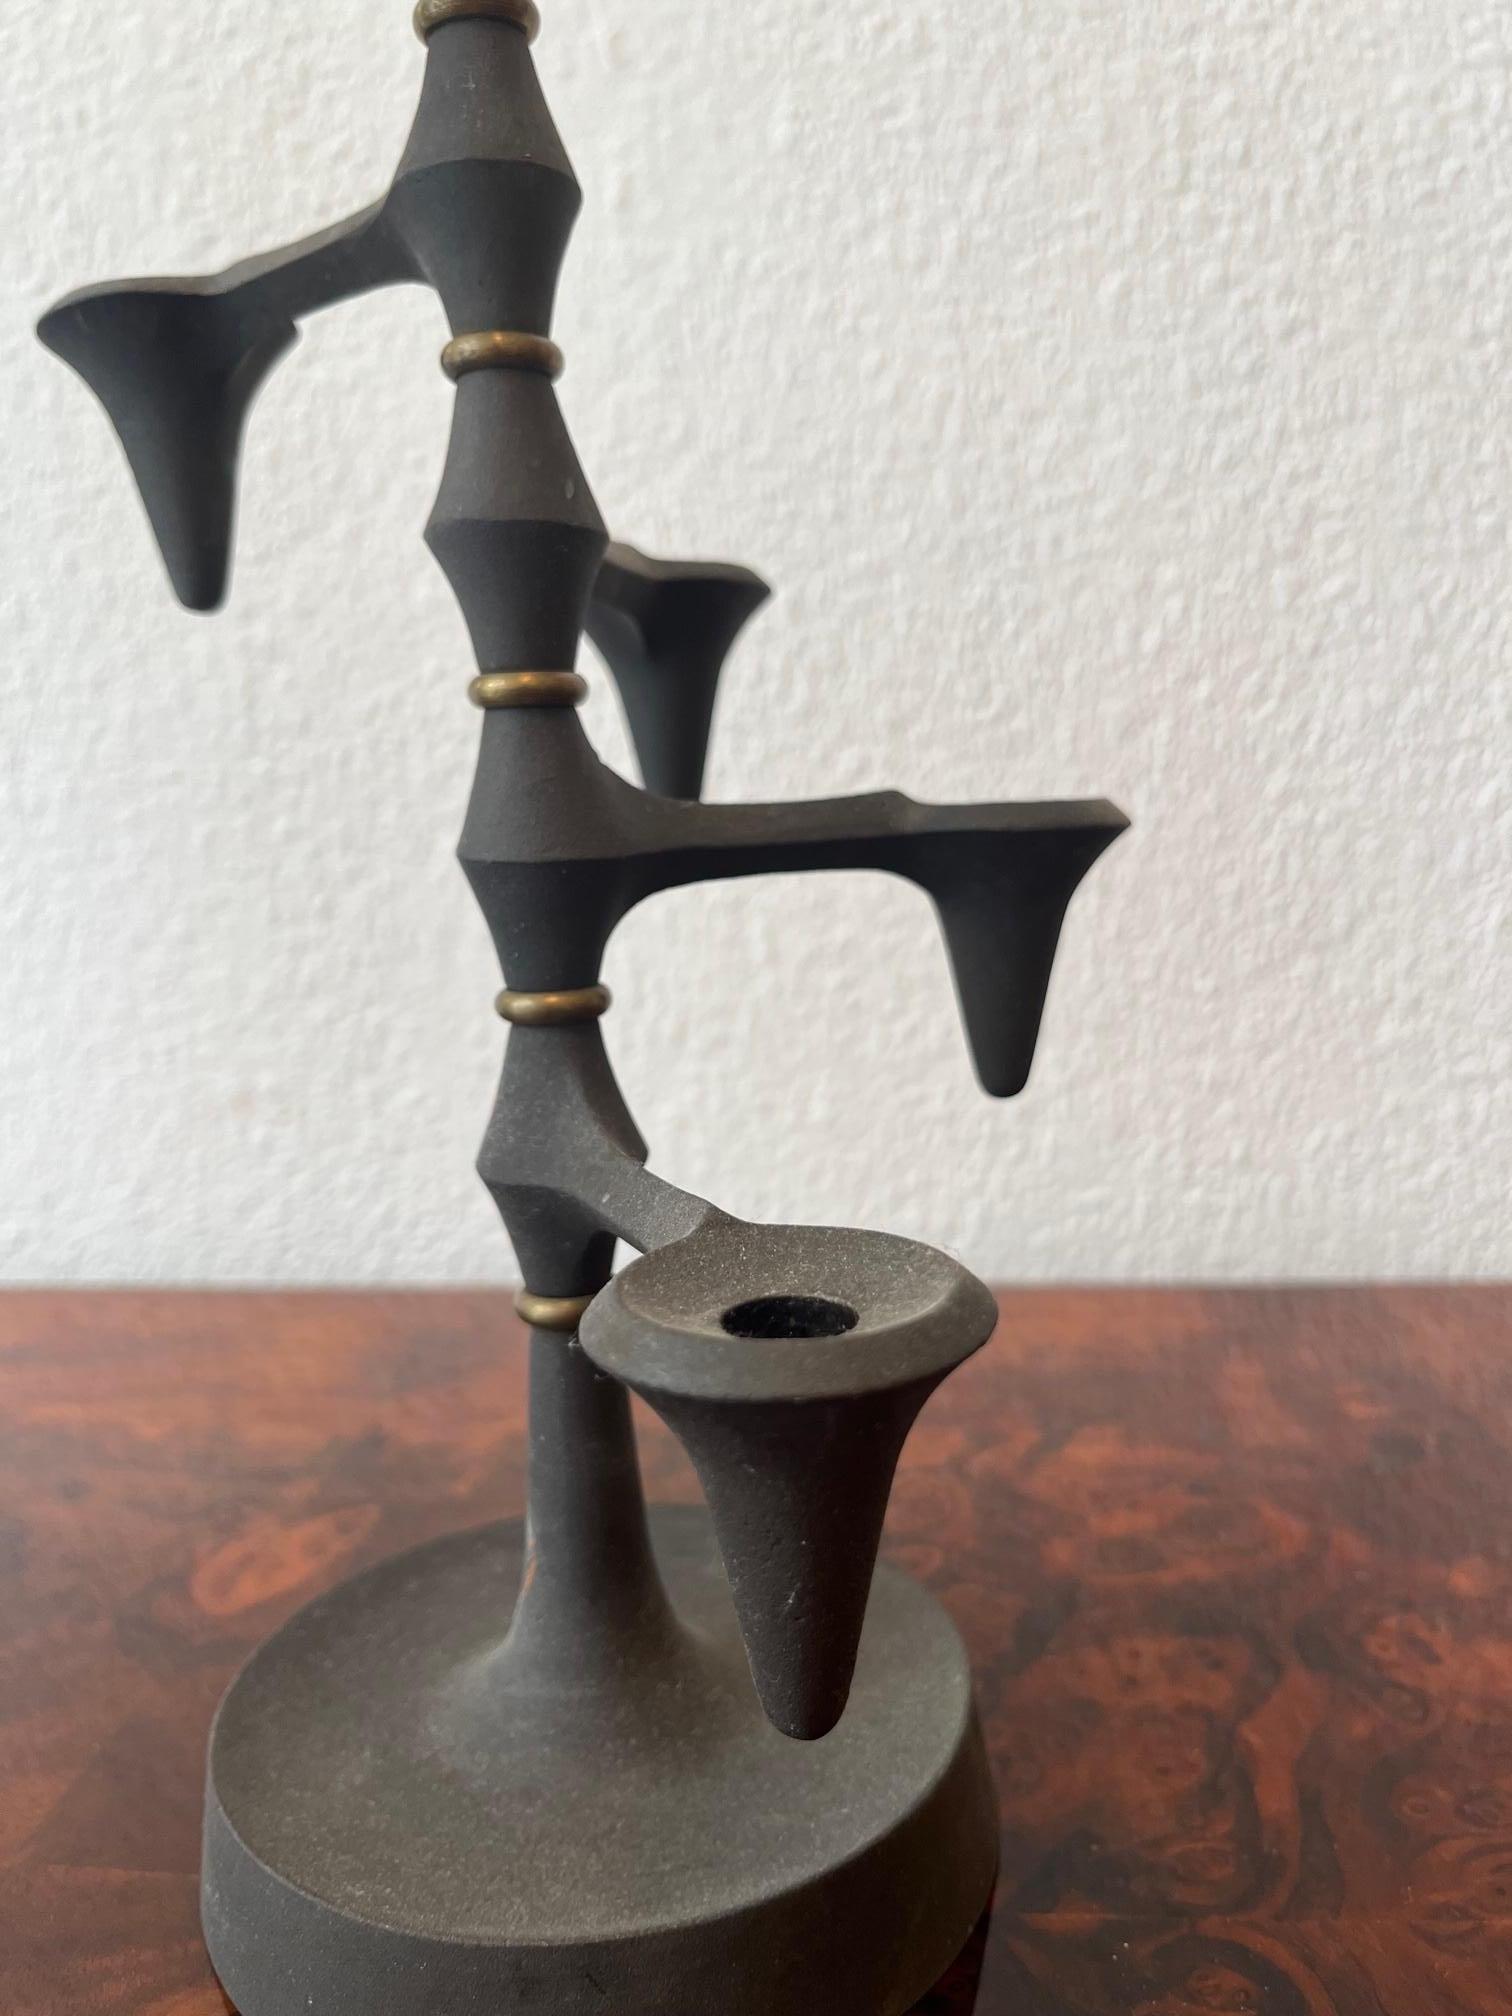 Mid-20th Century Vintage Danish Cast Iron Adjustable Candlestick by Jens Quistgaard, Denmark 1960 For Sale